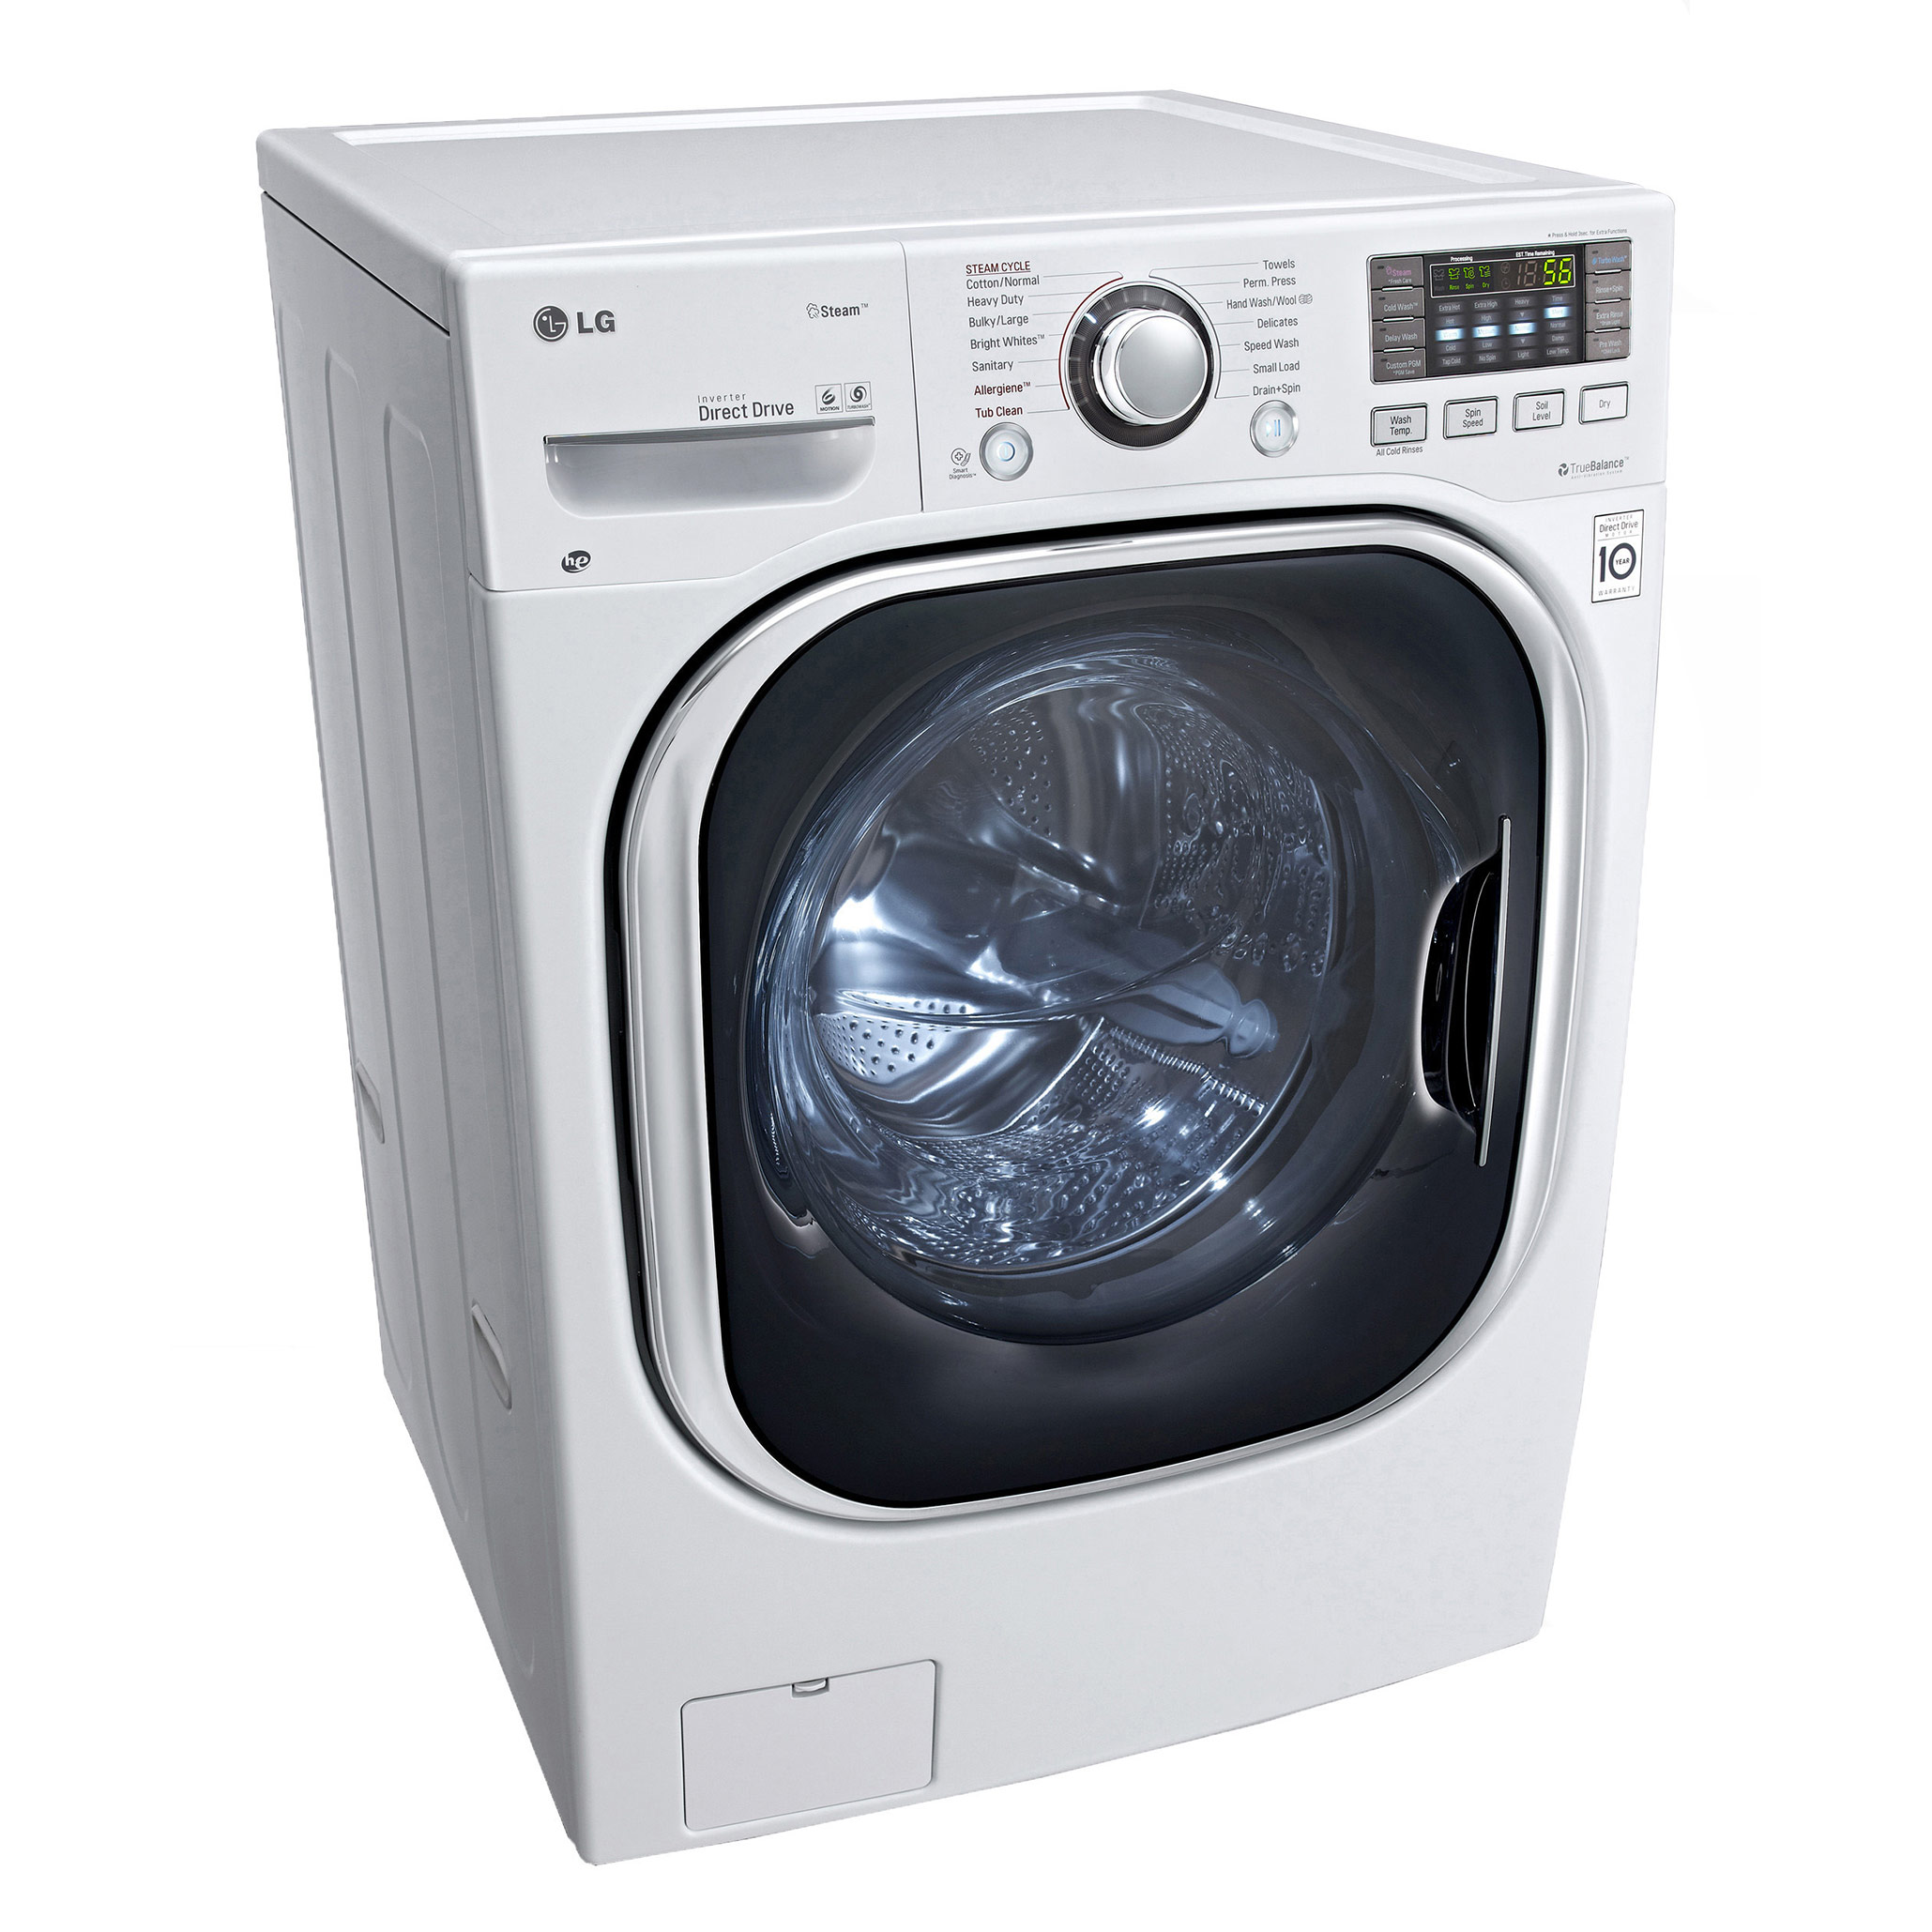 LG WM3997HWA | All in One Washer Dryer Combo | LGWasherDryer.com Best Compact Washer Dryer All In One